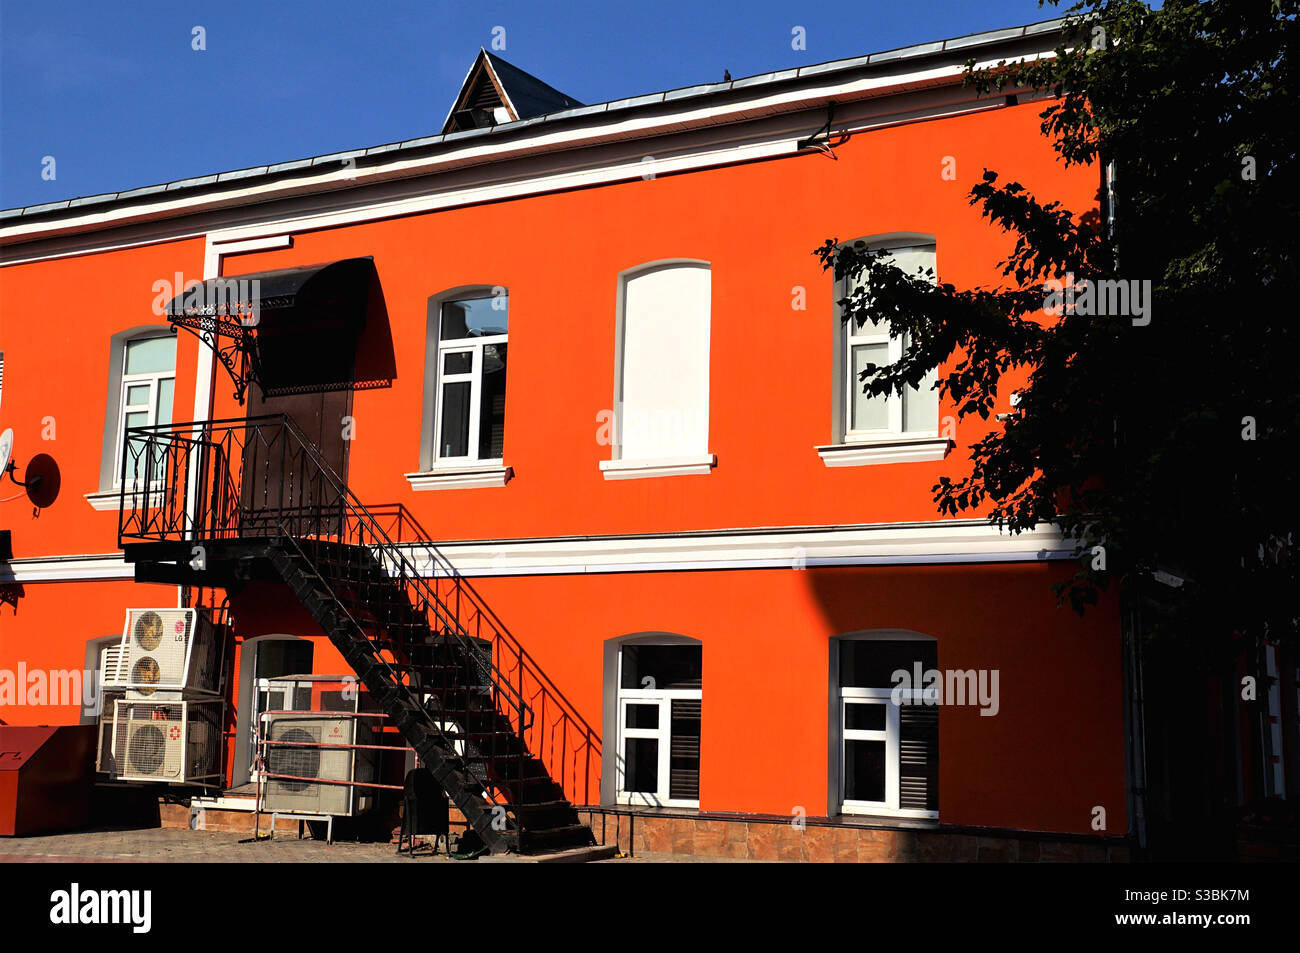 Bright red wall of old building in sunlight Stock Photo